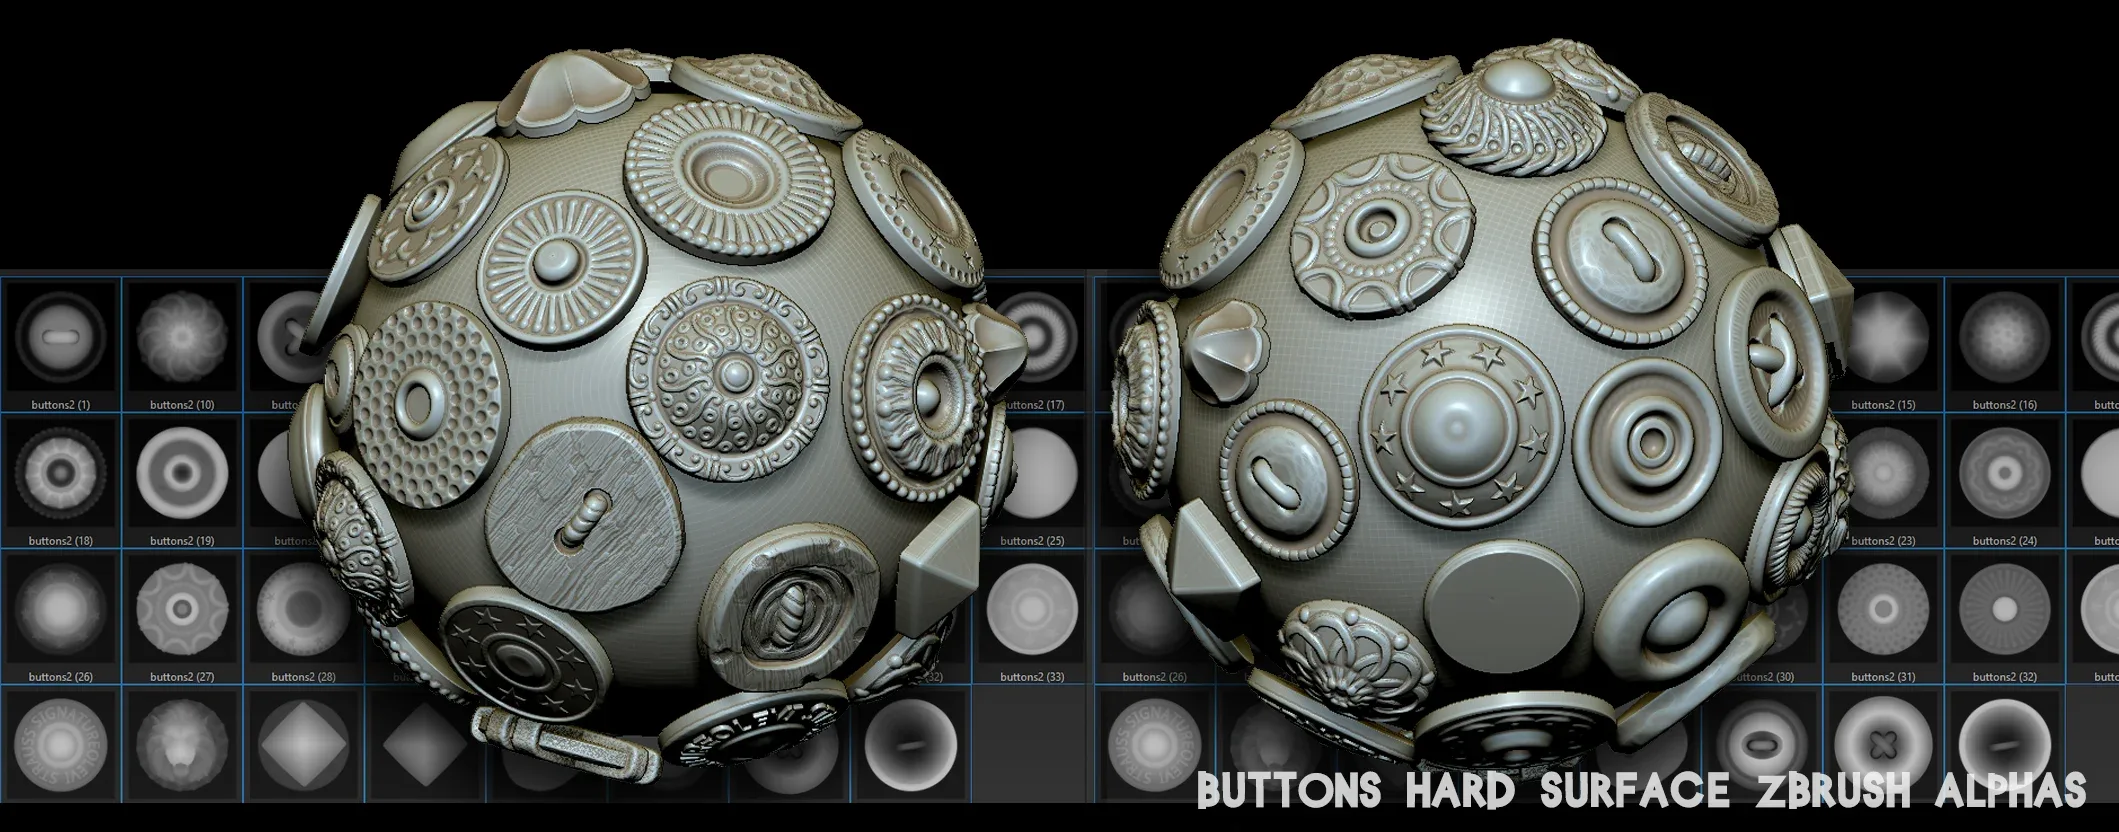 Buttons 35 Hard Surface Zbrush Alphas